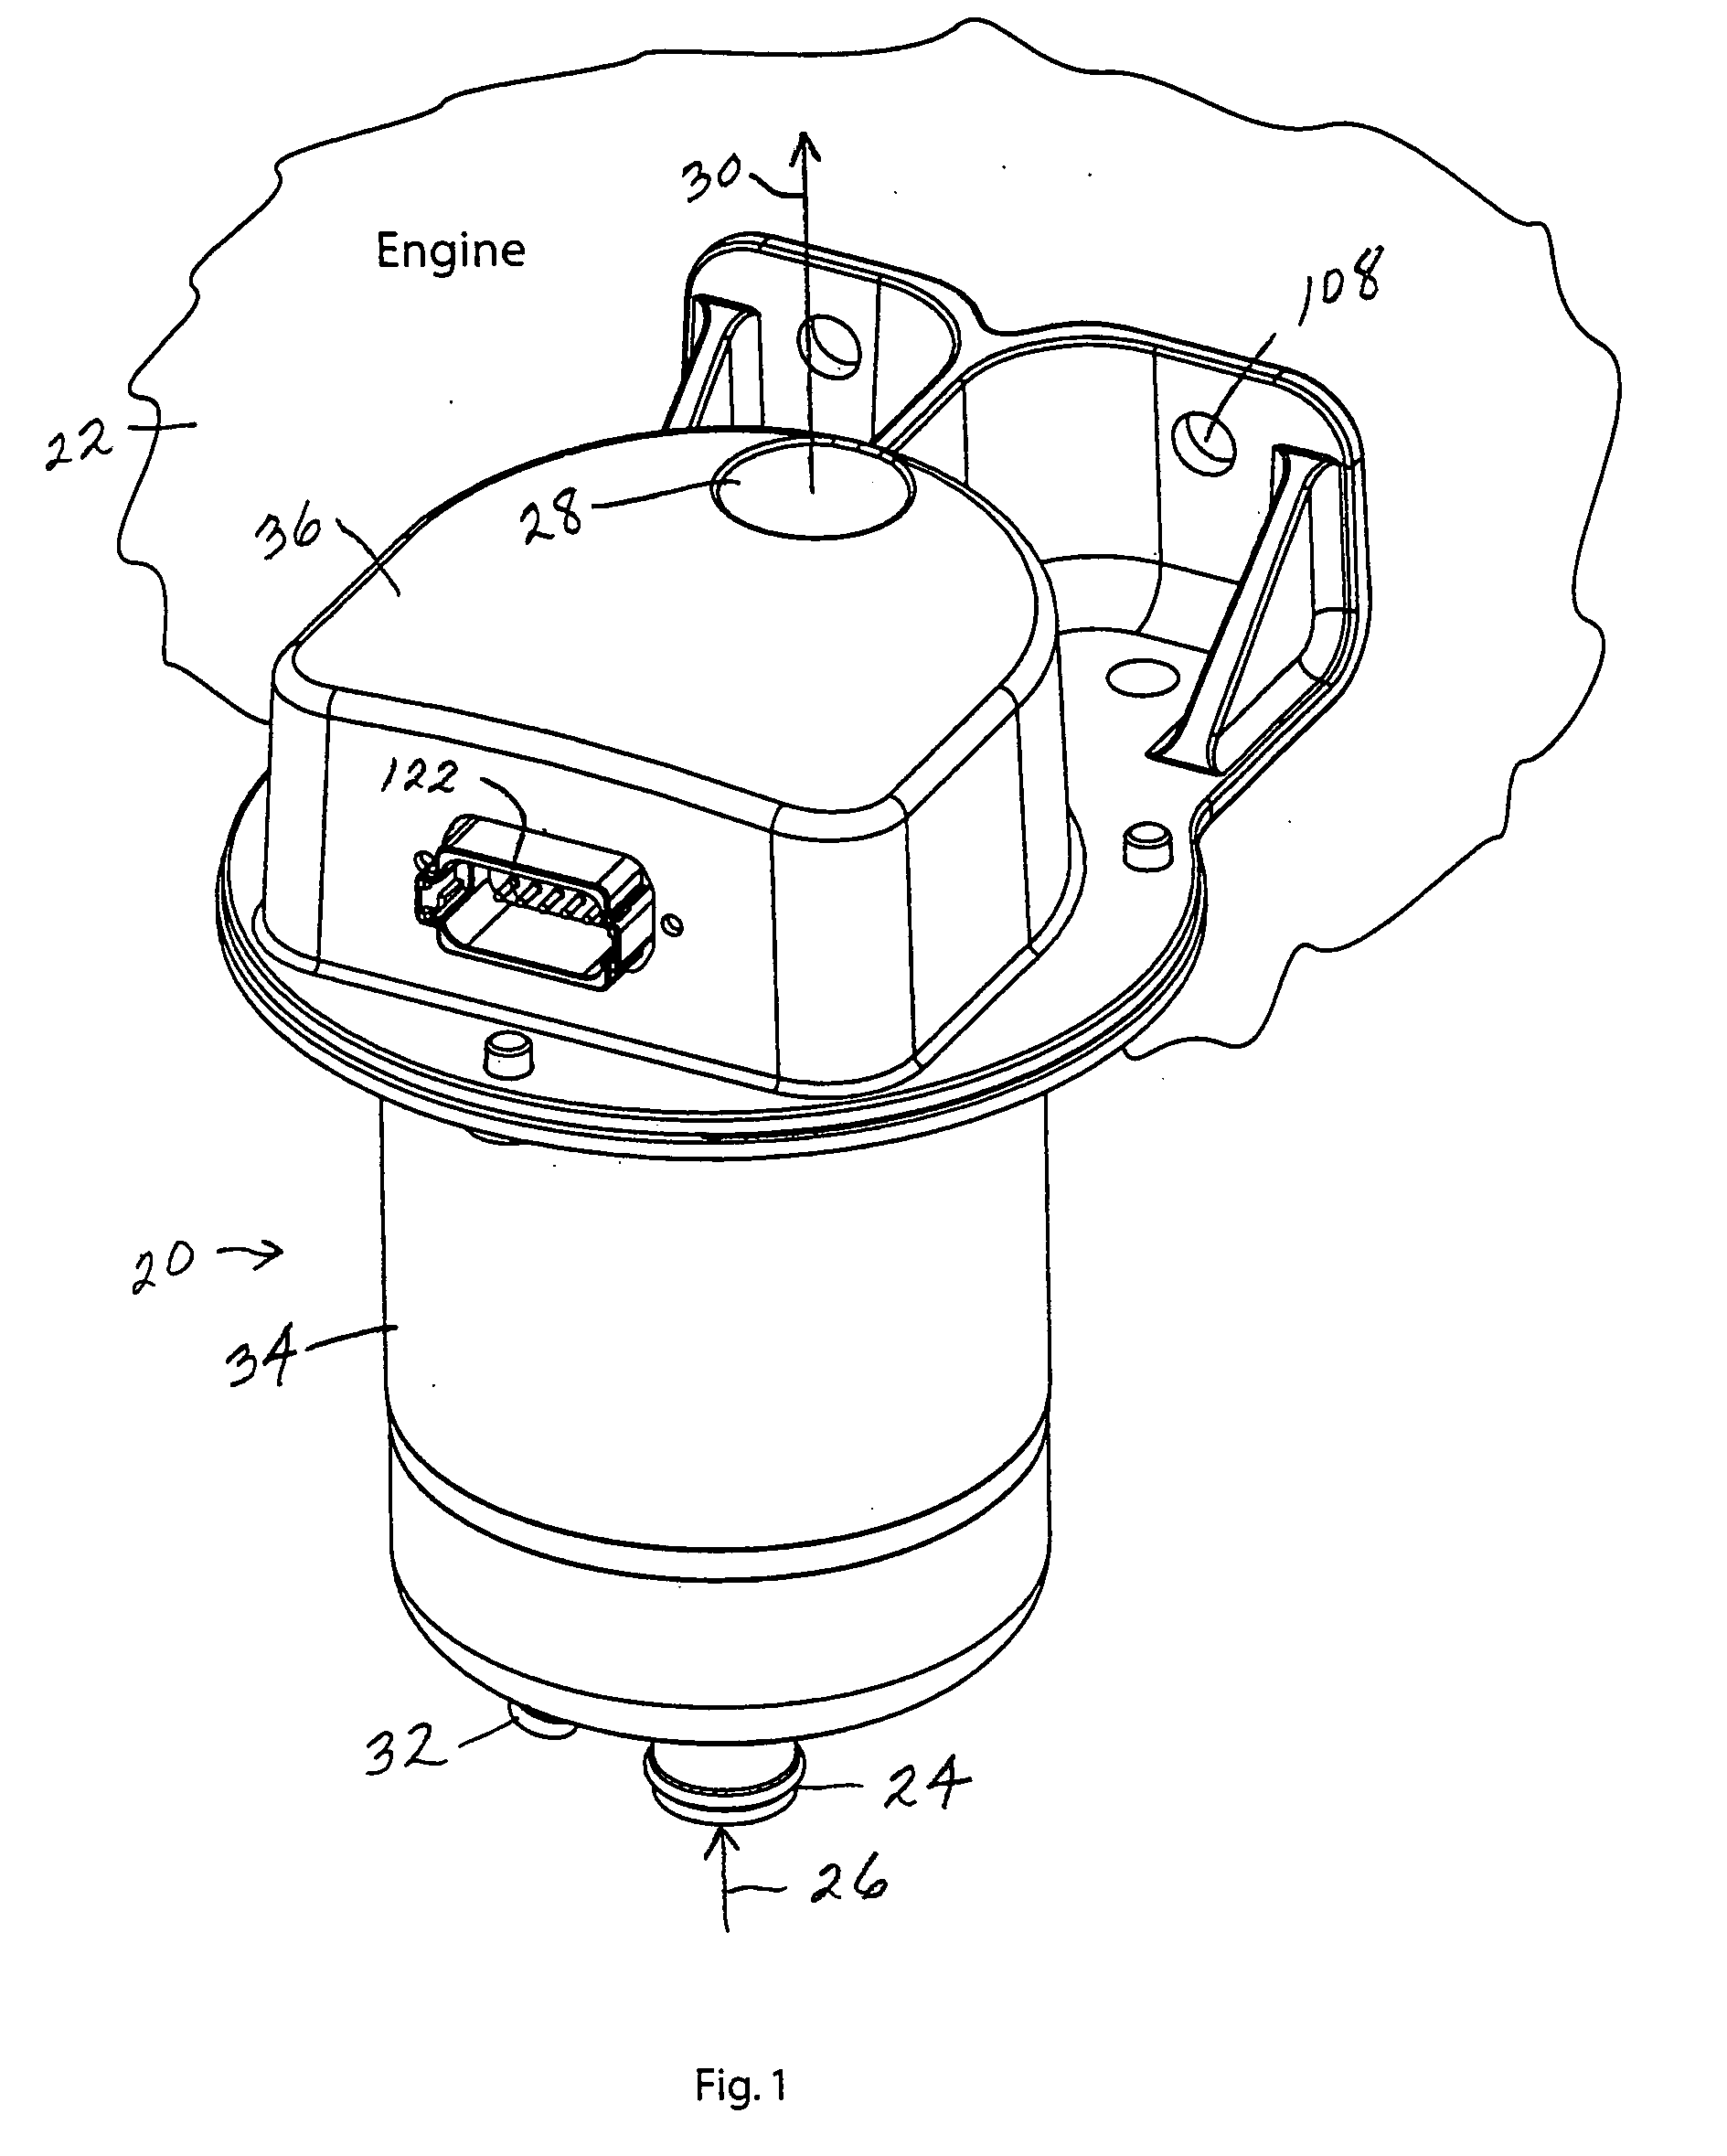 Electrostatic precipitator with pulsed high voltage power supply